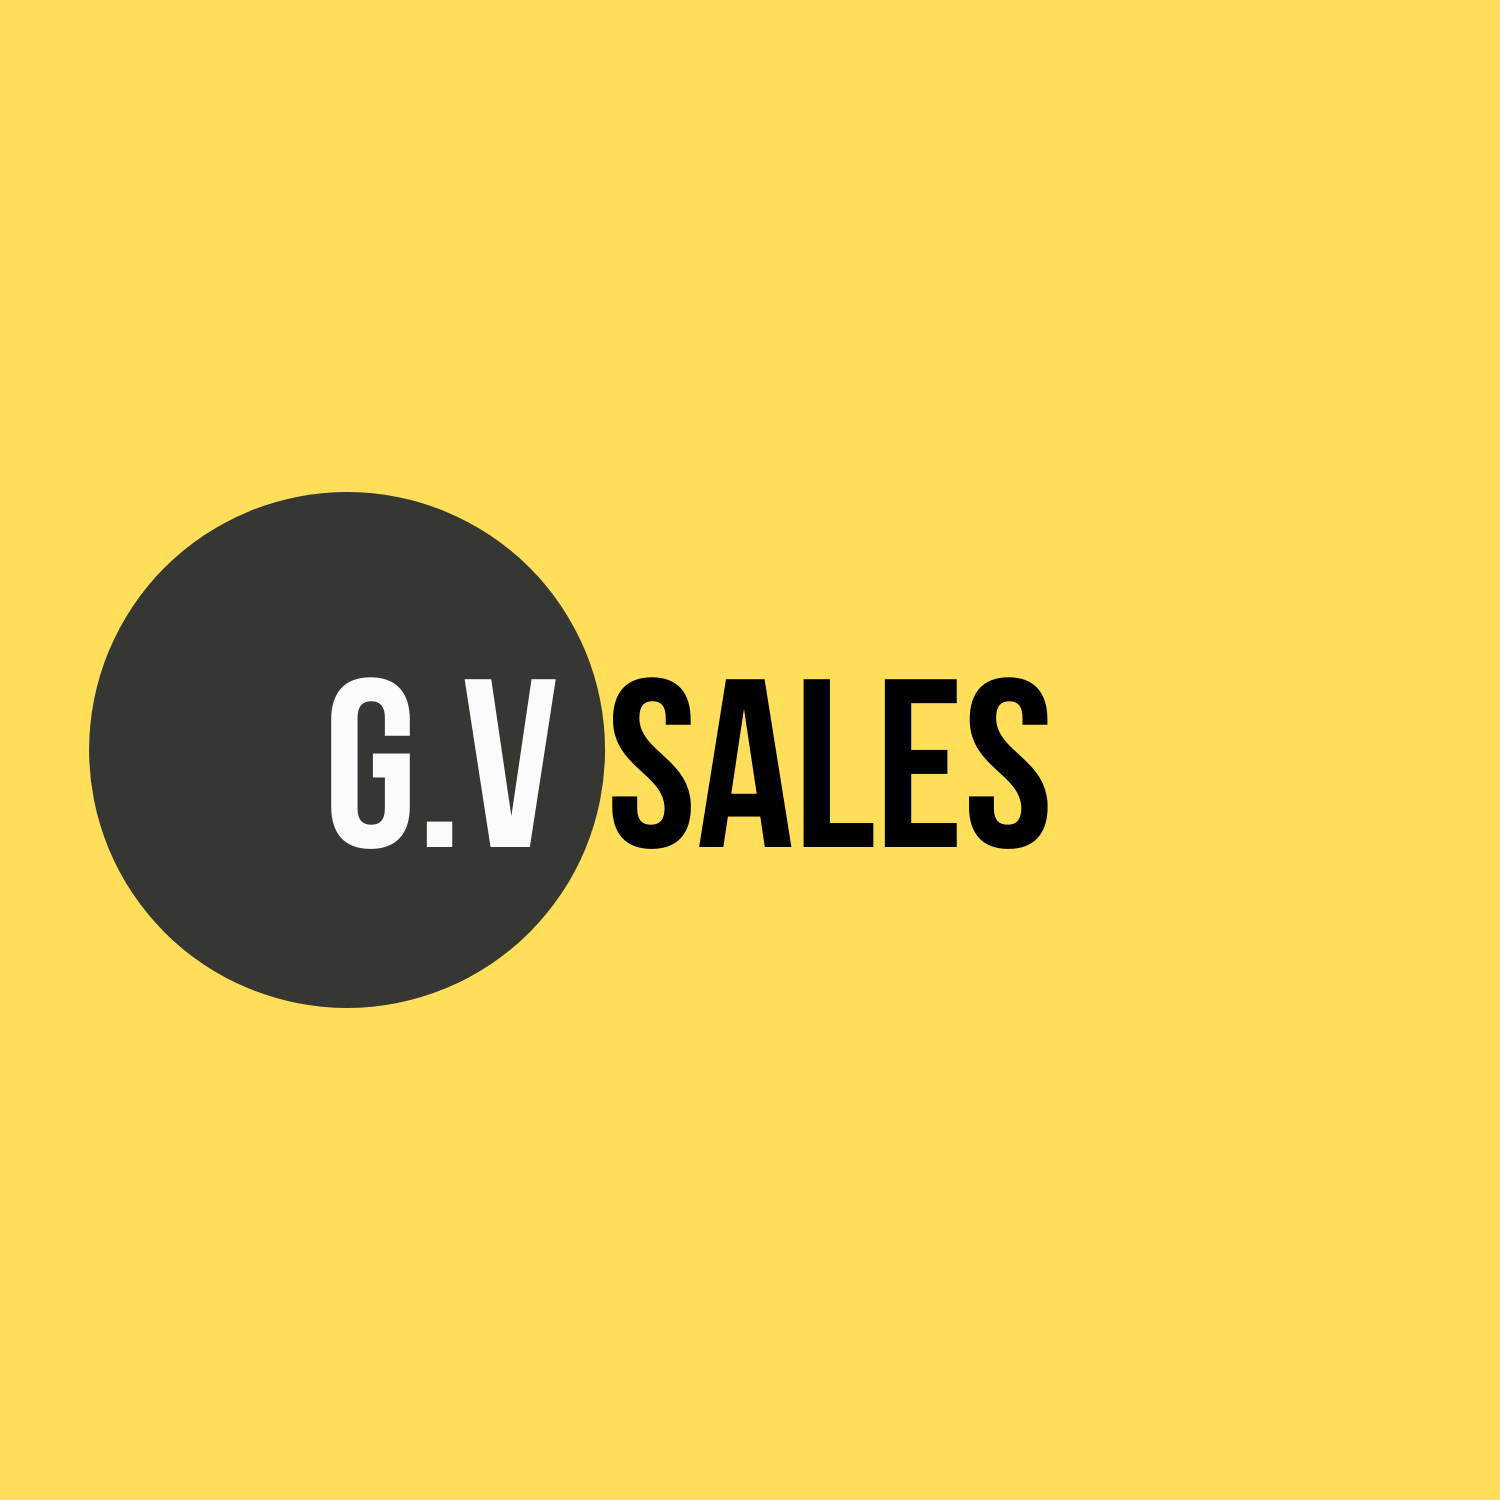 https://www.mncjobs.co.uk/company/gv-sales